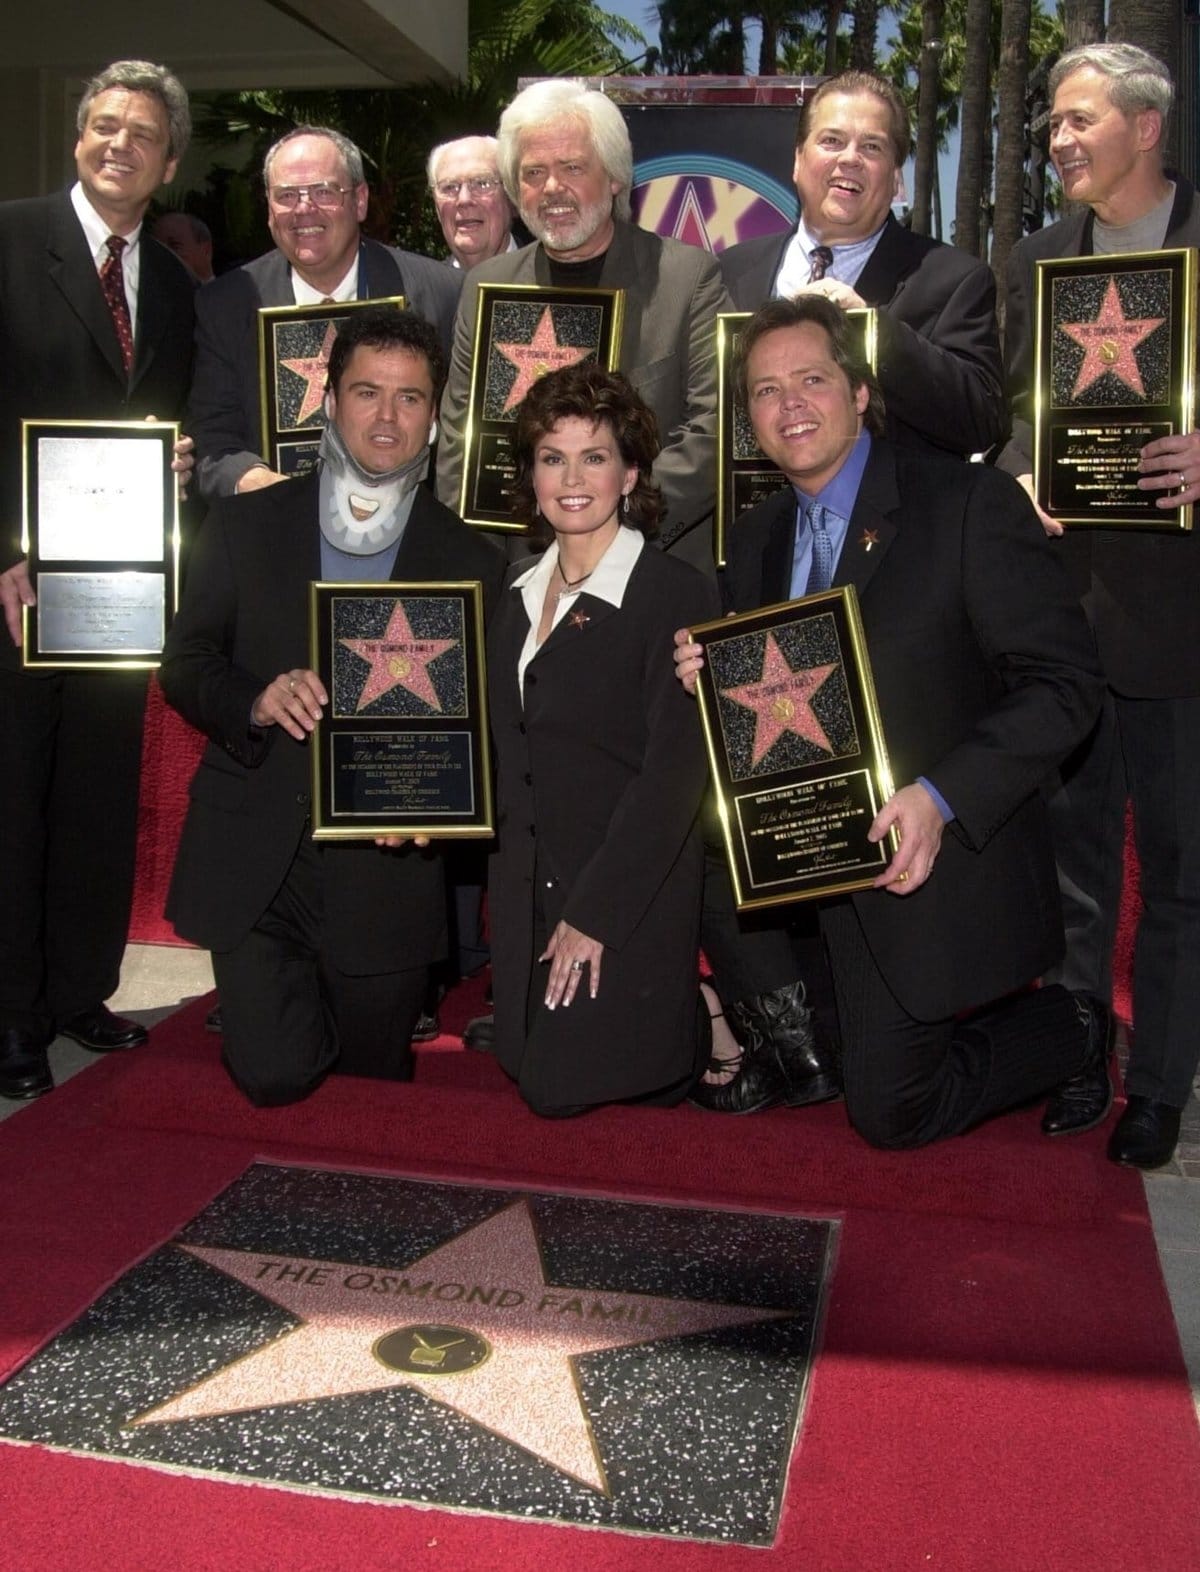 Donny, Marie, and Jimmy Osmond are seated with Jay, Tom, family patriarch George, singer Andy Williams, Merrill, Allan, and Wayne Osmond standing at a ceremony honoring The Osmond family with a star on the Hollywood Walk of Fame